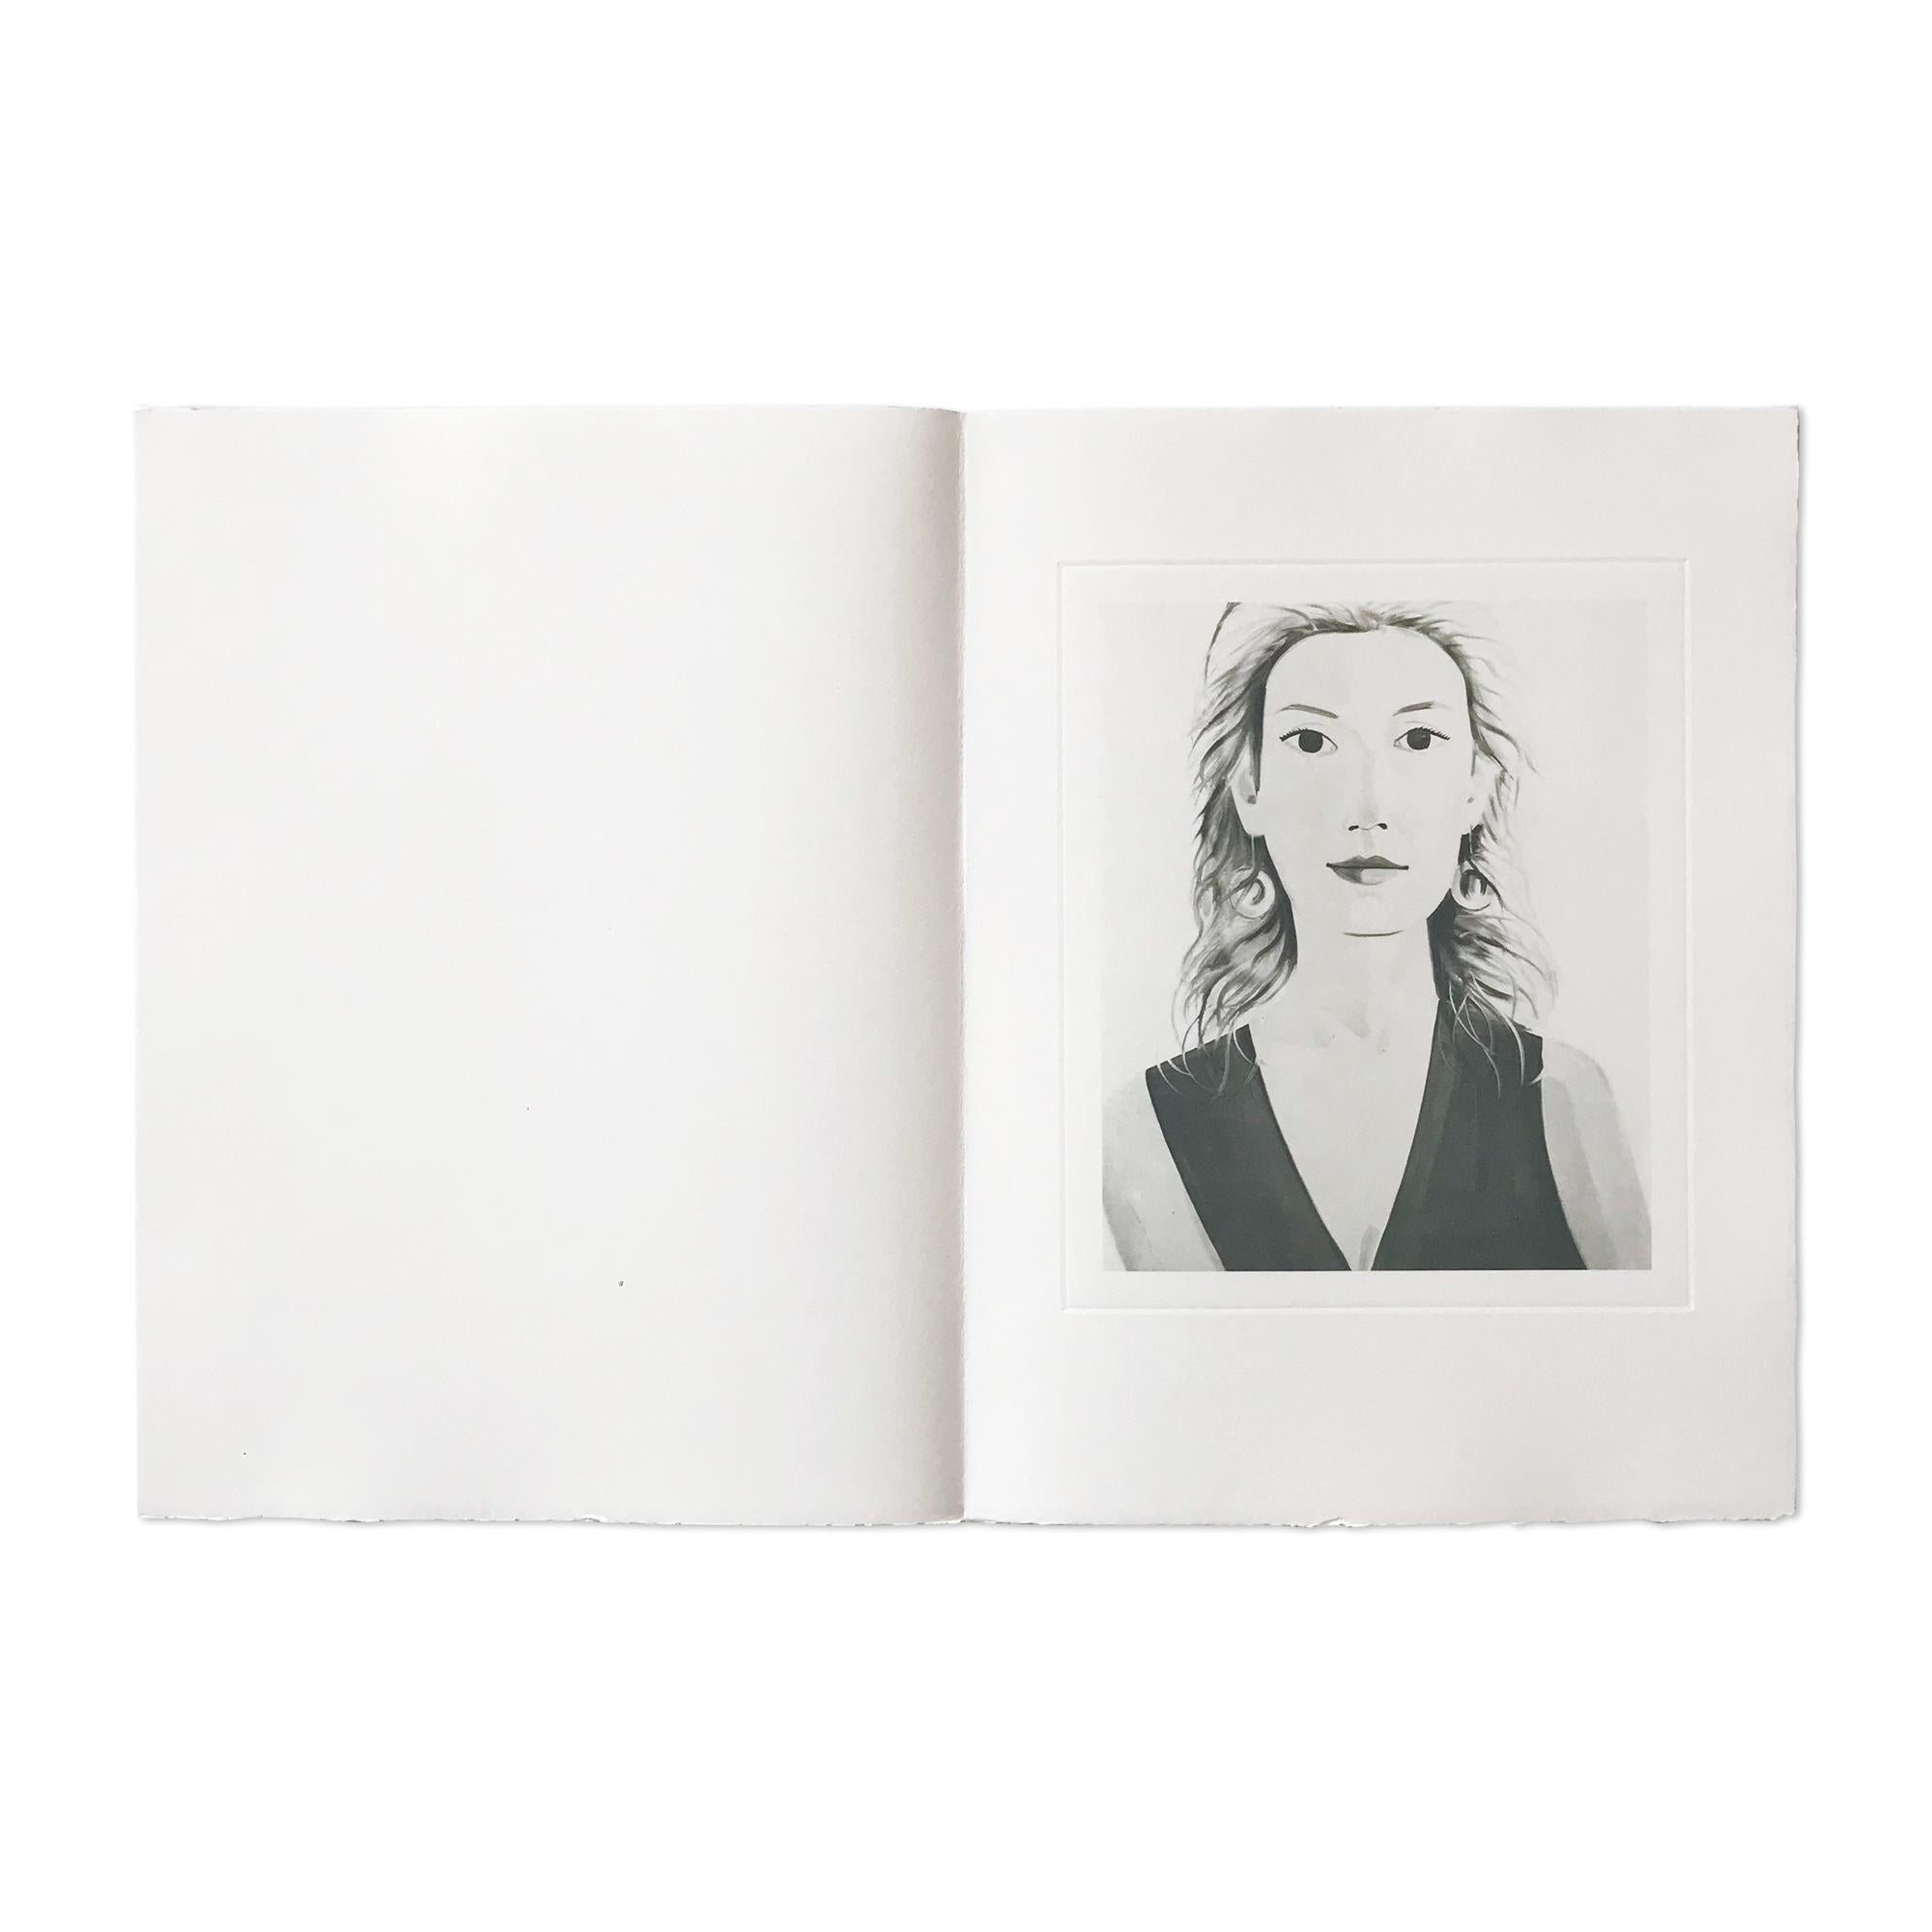 Alex Katz (American, b. 1927)
Six Female Portraits, 2004
Medium: Portfolio of 6 photogravures on folded double pages of 300g Zerkall etching paper (issued as loose sheets in a grey portfolio case)
Dimensions: 24.2 x 19.8 (40.2 x 61 cm)
Edition of